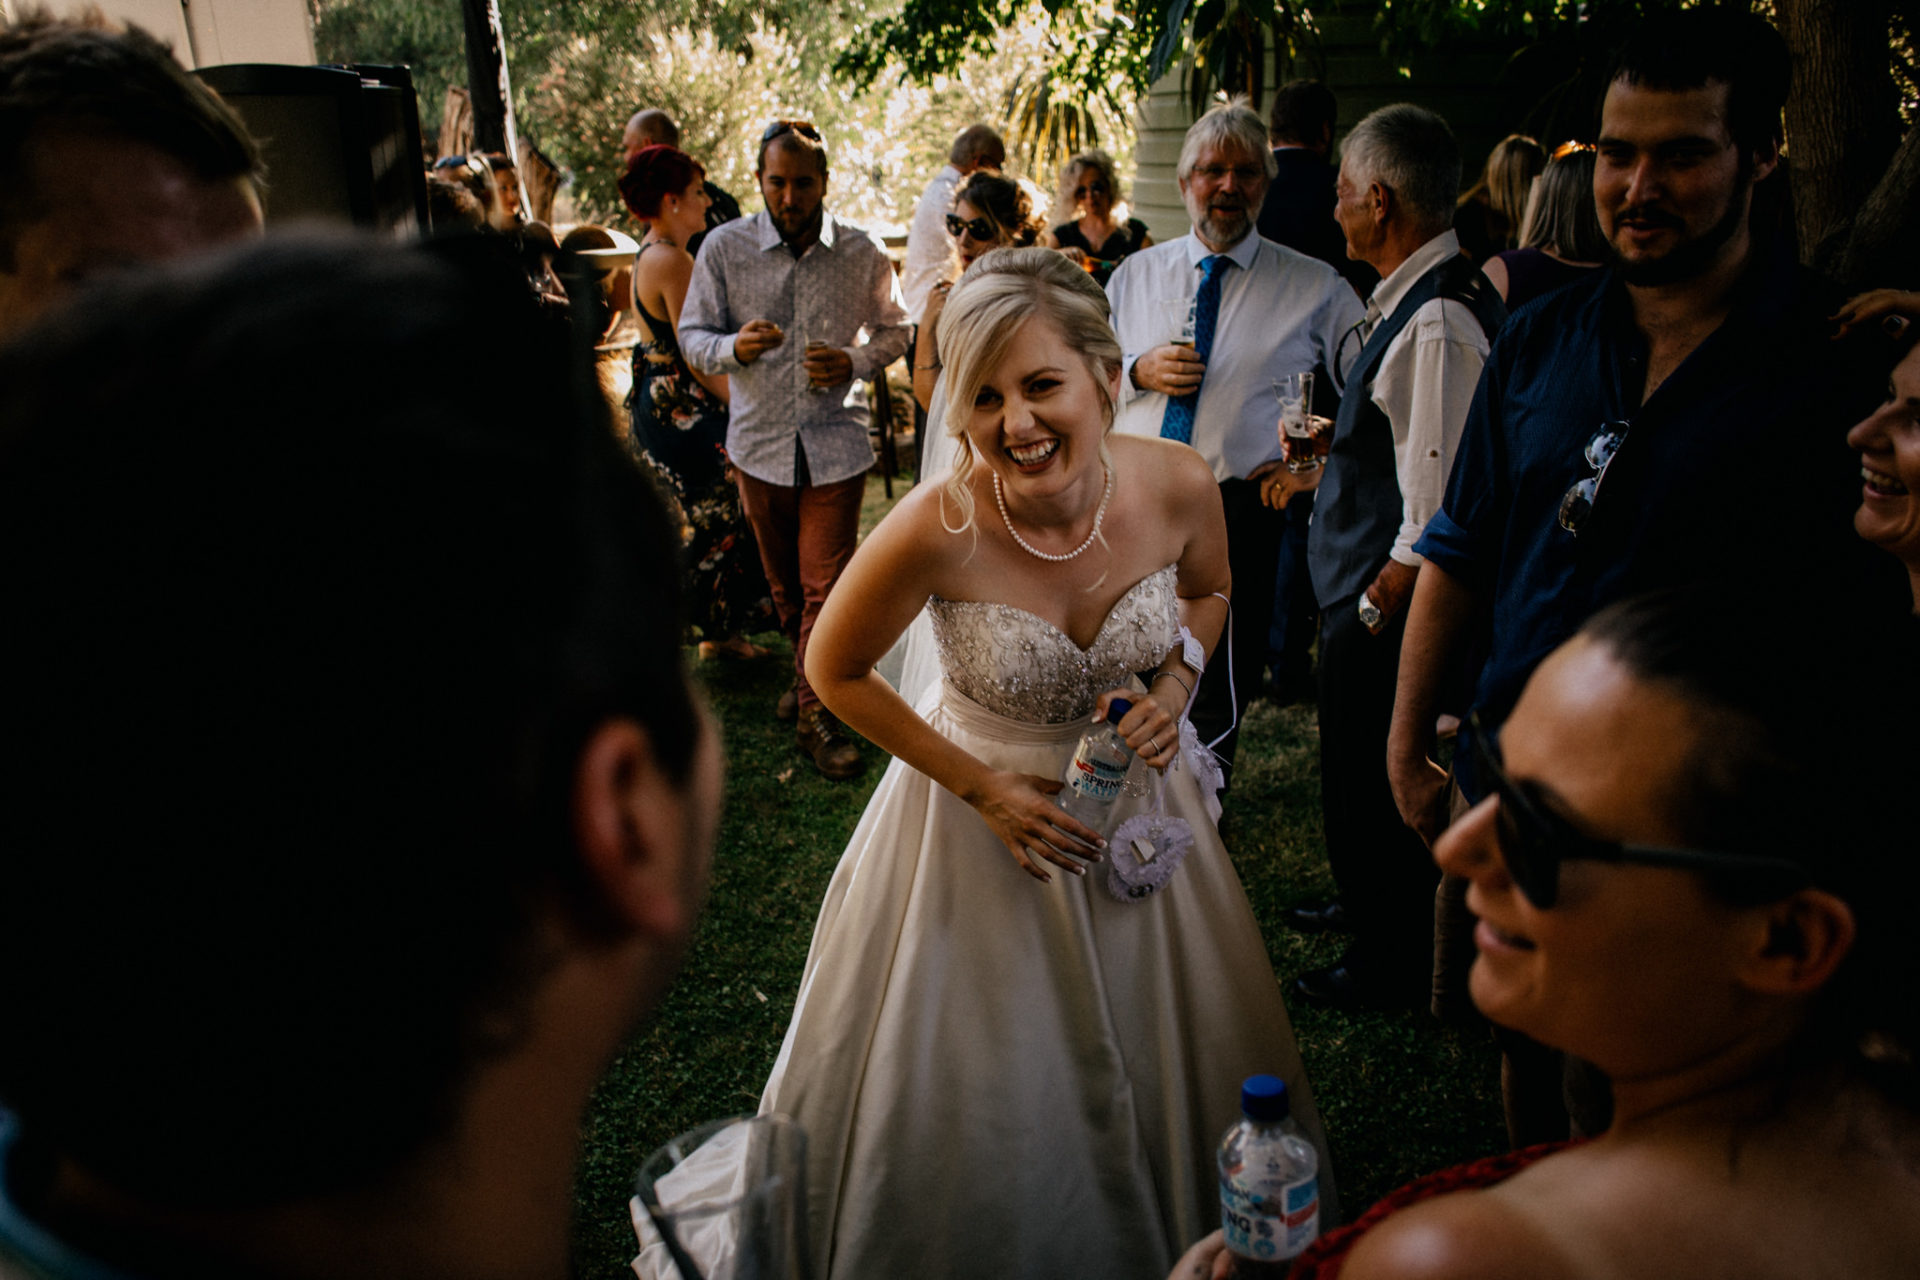 backyard-wedding-australia-melbourne-bride-laughing-with-guests